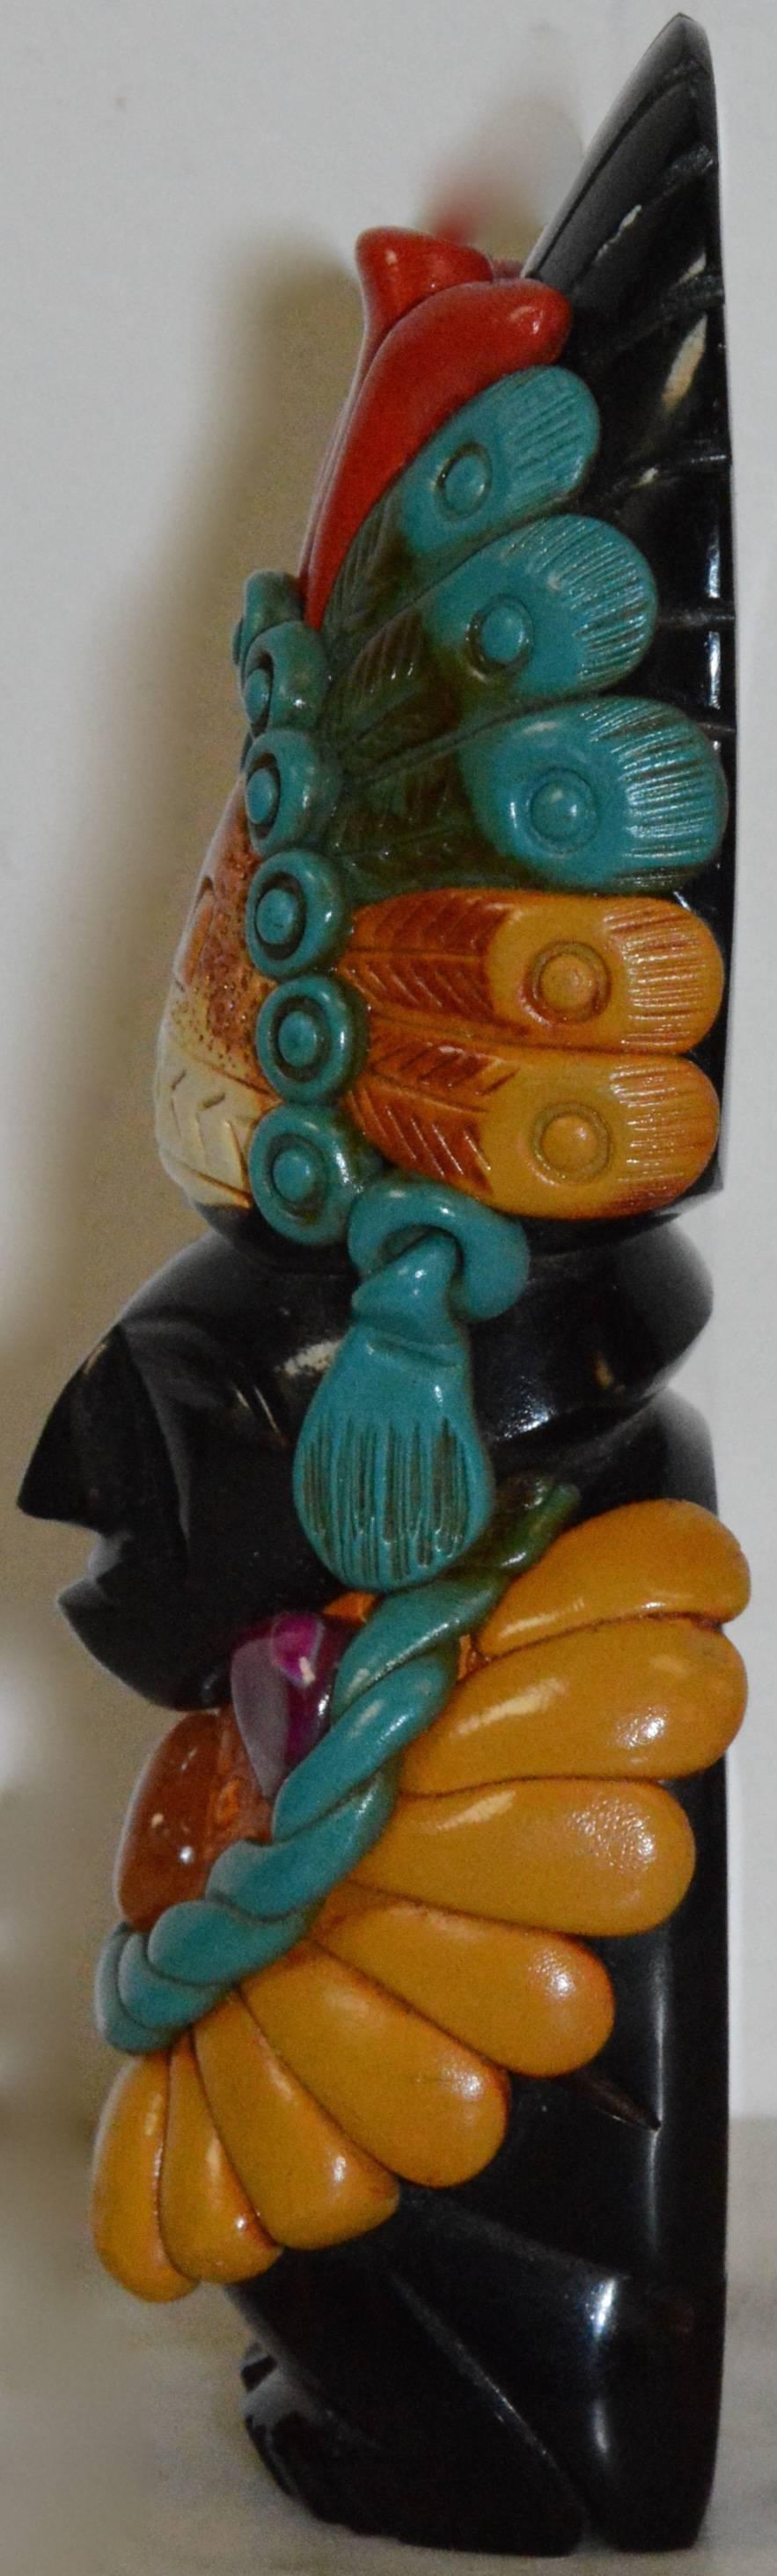 We are offering a carved stone statuette, embellished with stone and formed polymer accents. The statuette depicts a man with a carved face, which is made of black onyx. The figure is embellished with applied dyed quartz stones, and with embossed